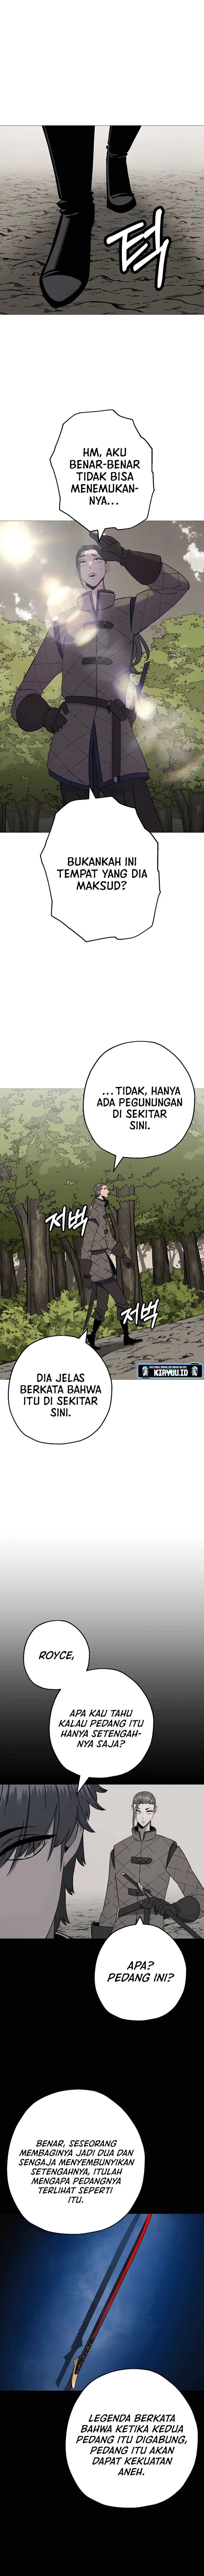 Dilarang COPAS - situs resmi www.mangacanblog.com - Komik the story of a low rank soldier becoming a monarch 125 - chapter 125 126 Indonesia the story of a low rank soldier becoming a monarch 125 - chapter 125 Terbaru 1|Baca Manga Komik Indonesia|Mangacan